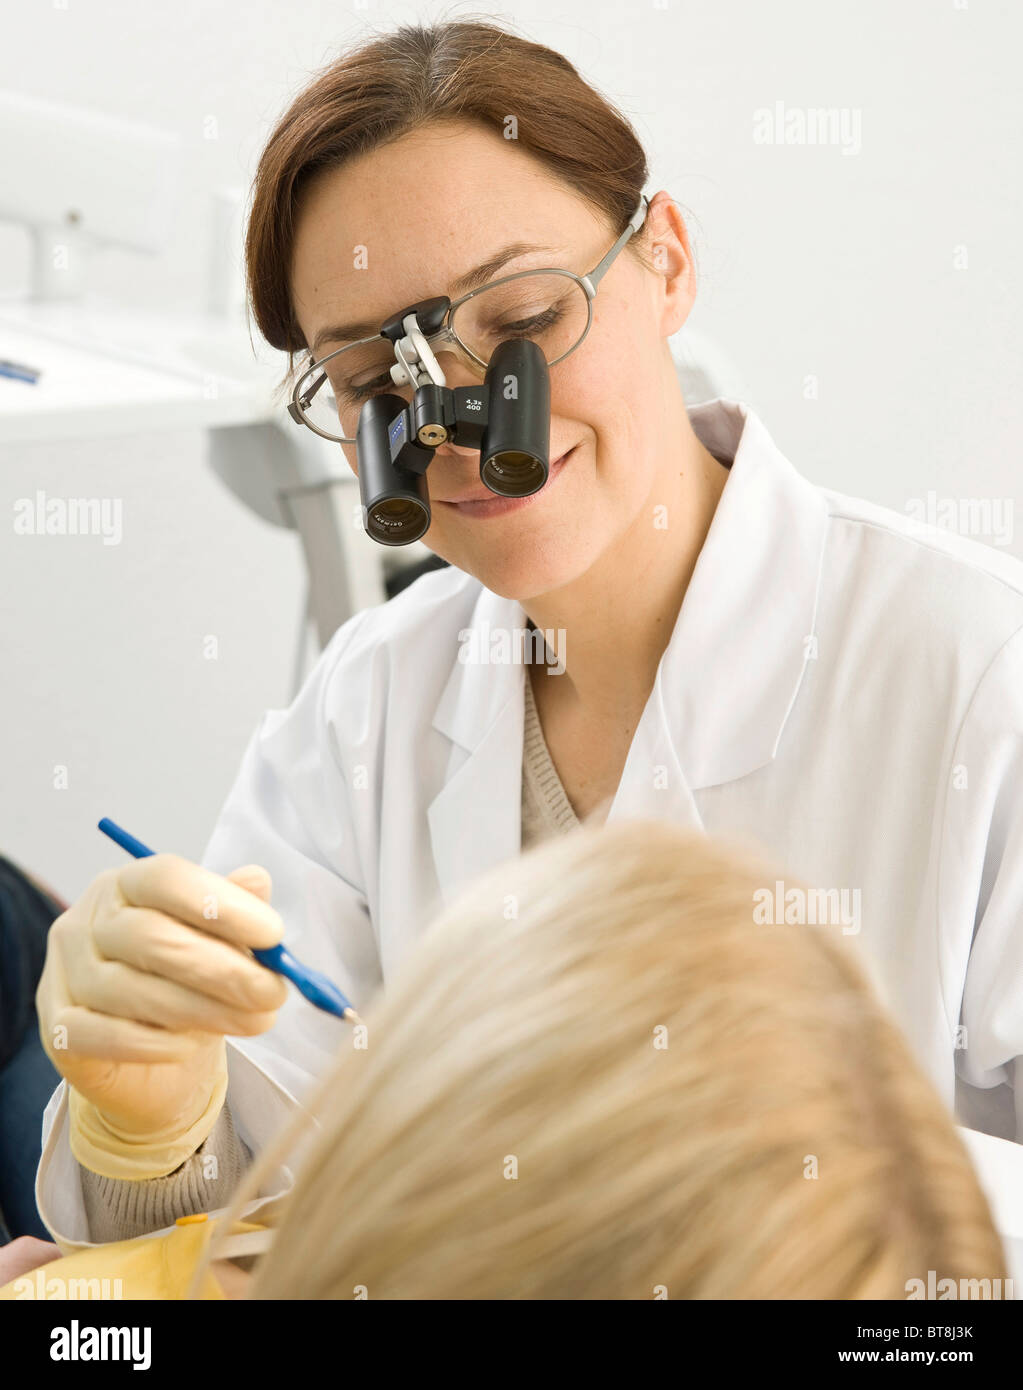 Dentist wearing magnifying glasses, treating a patient Stock Photo